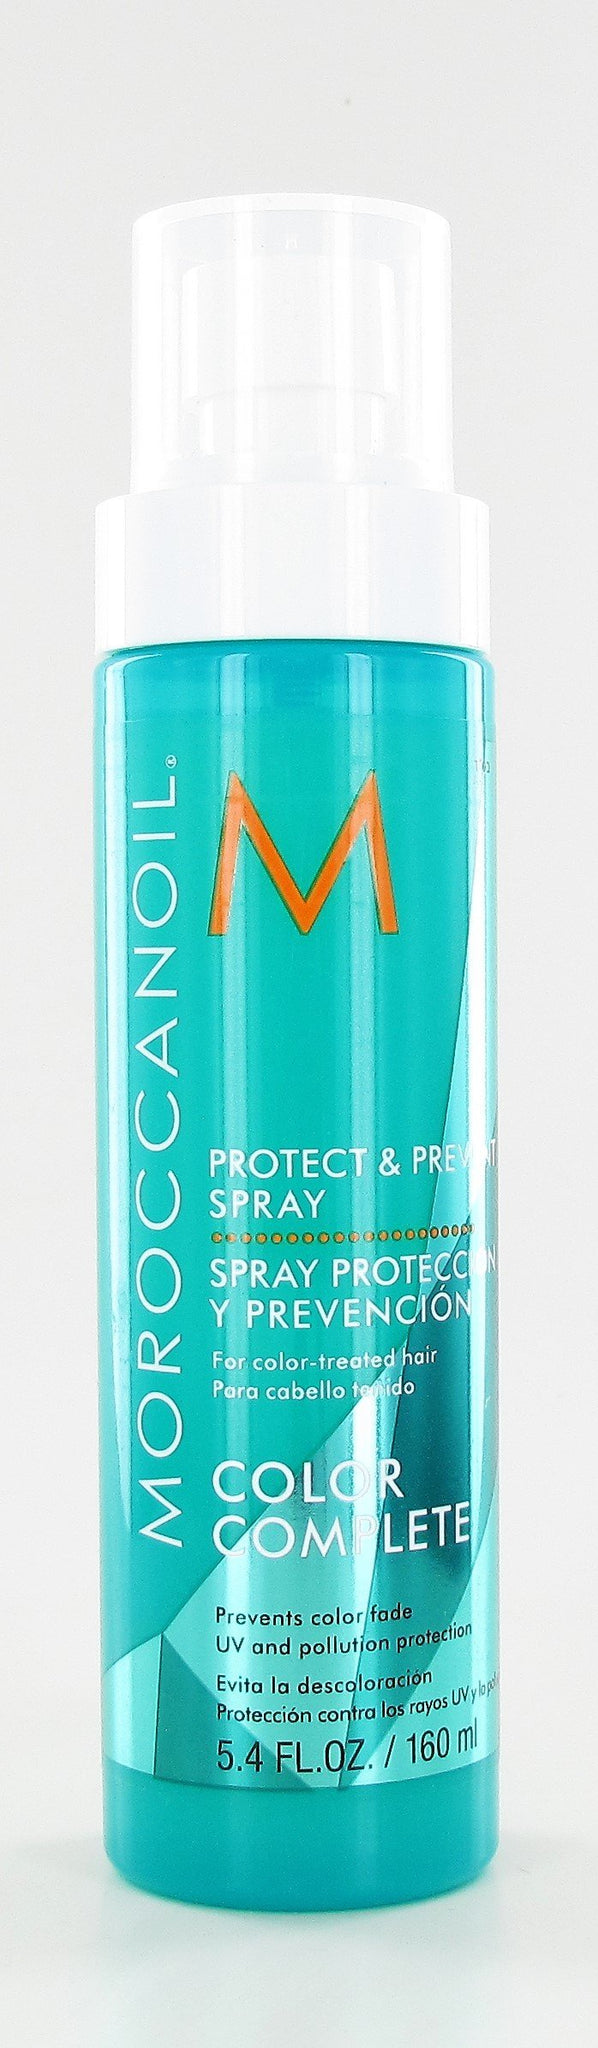 MOROCCAN OIL Color Complete Protect and Prevent Spray 5.4 oz